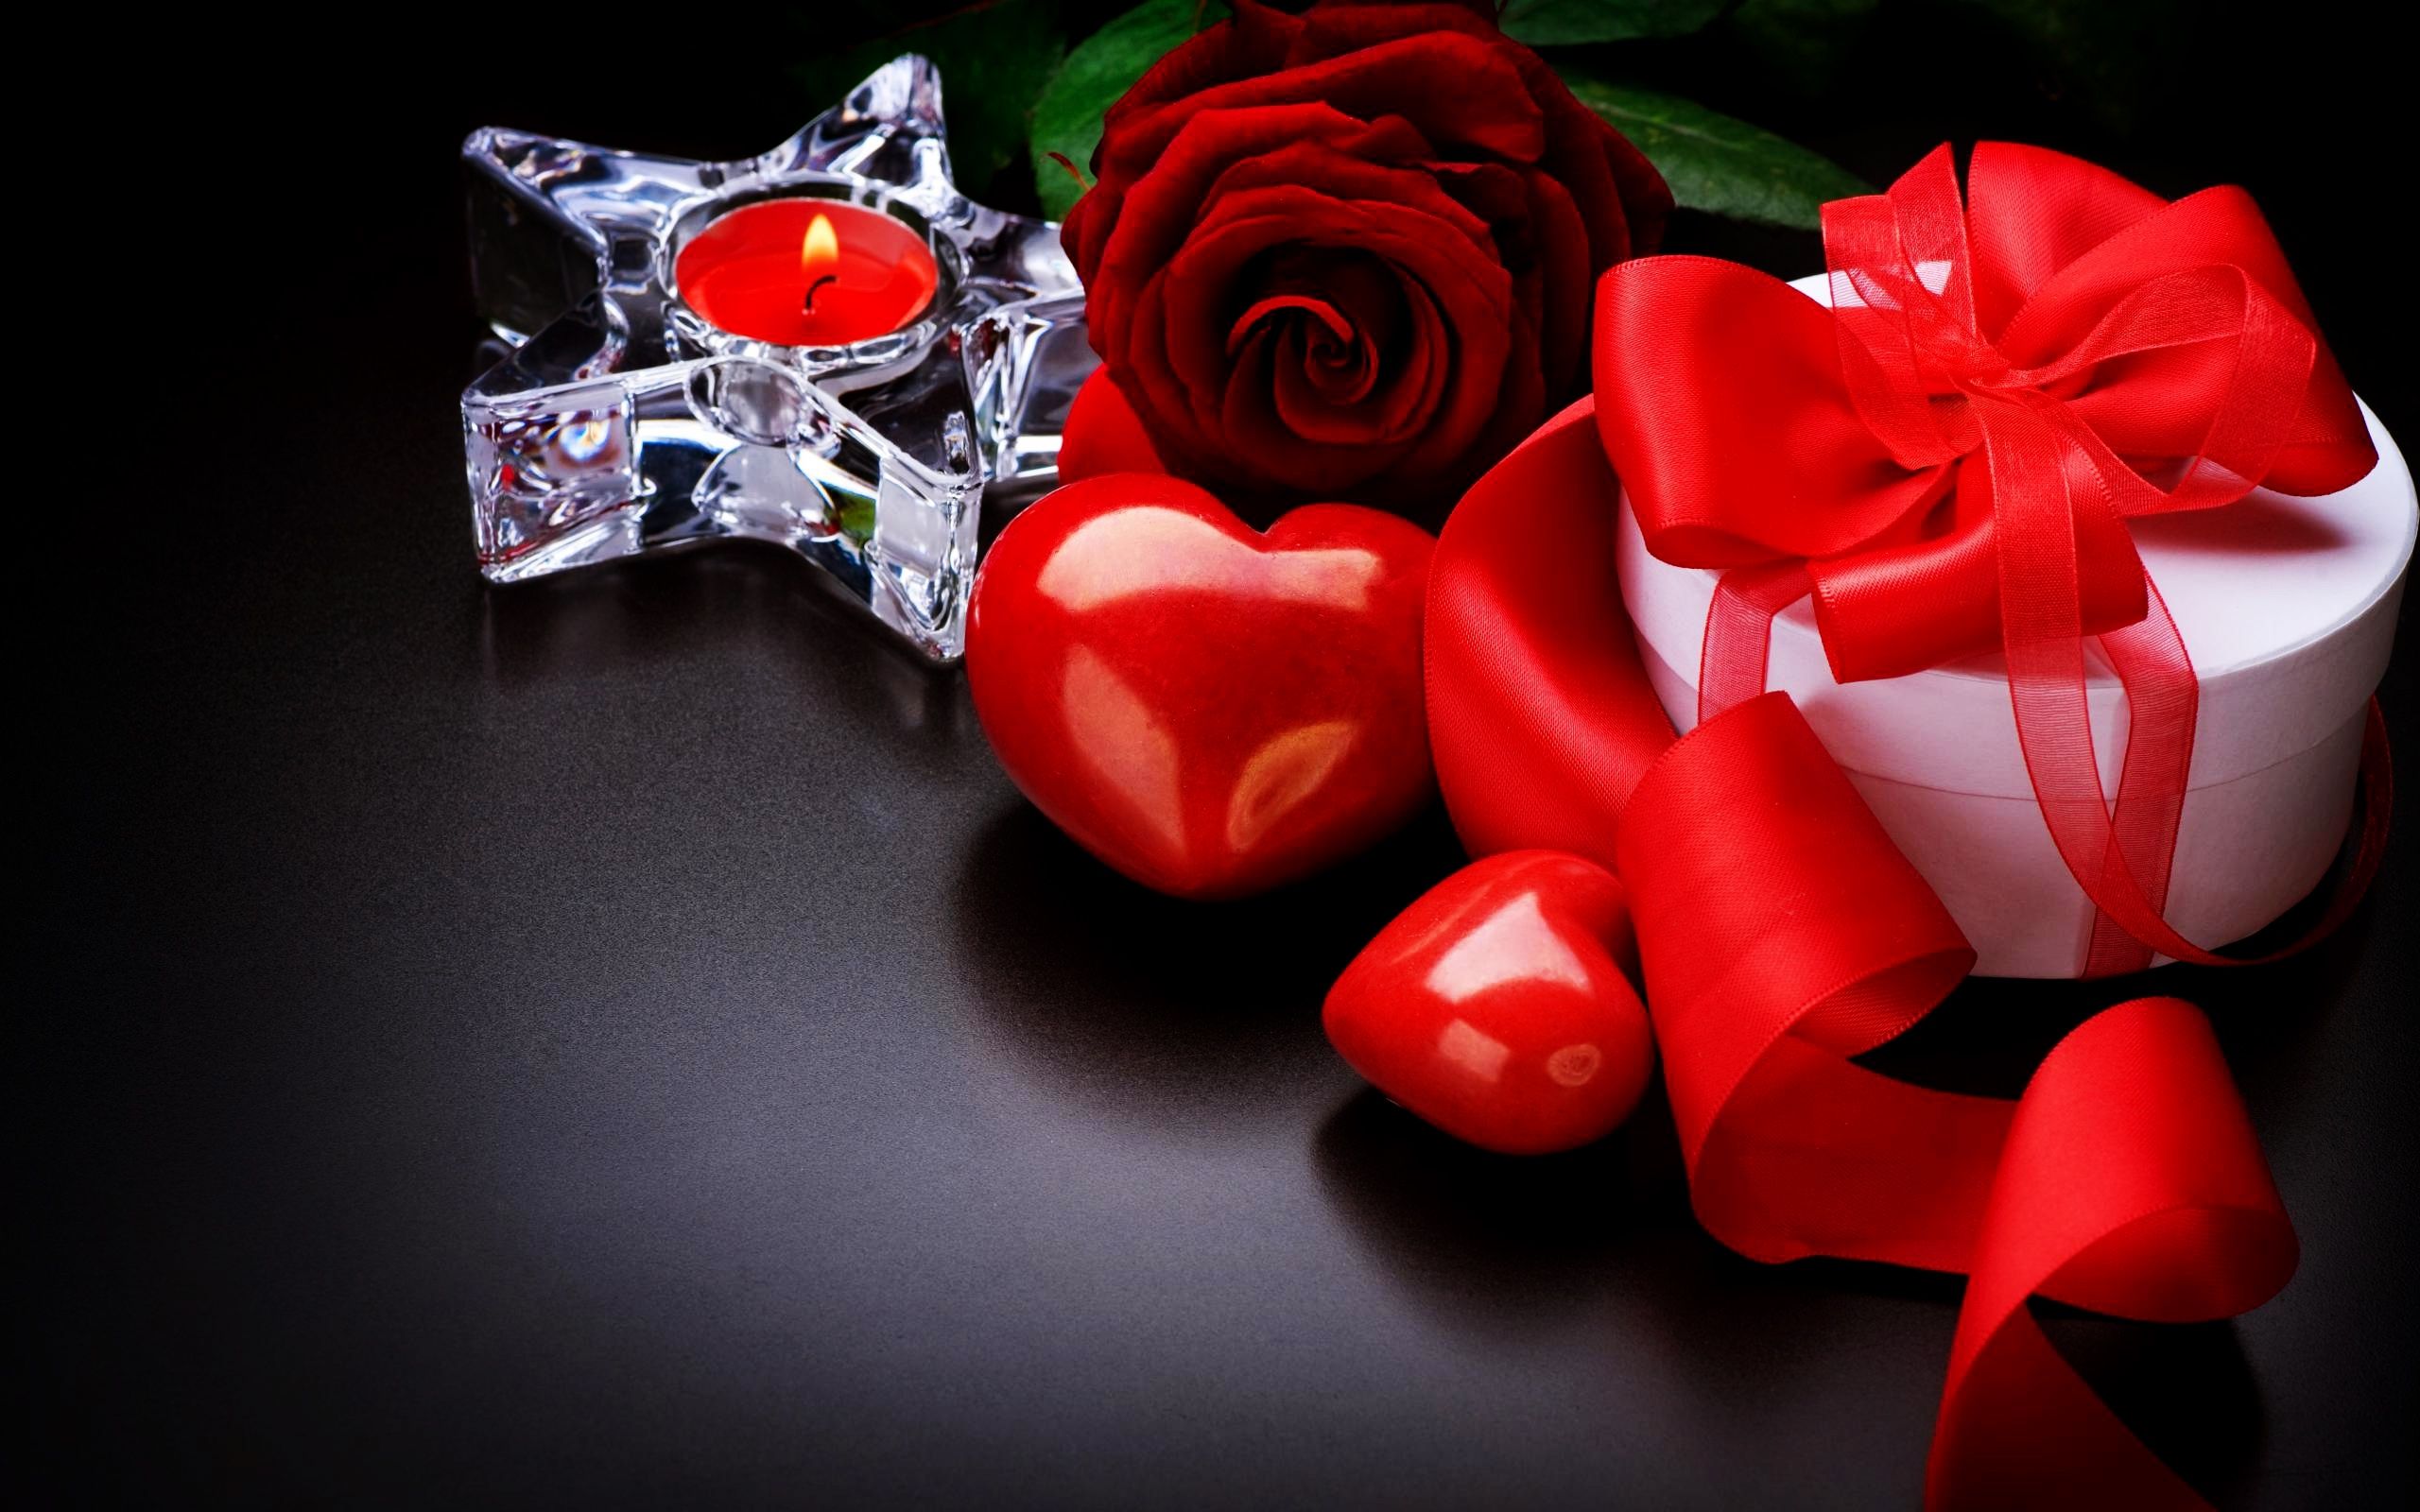 HD wallpaper, Day, For, Valentines